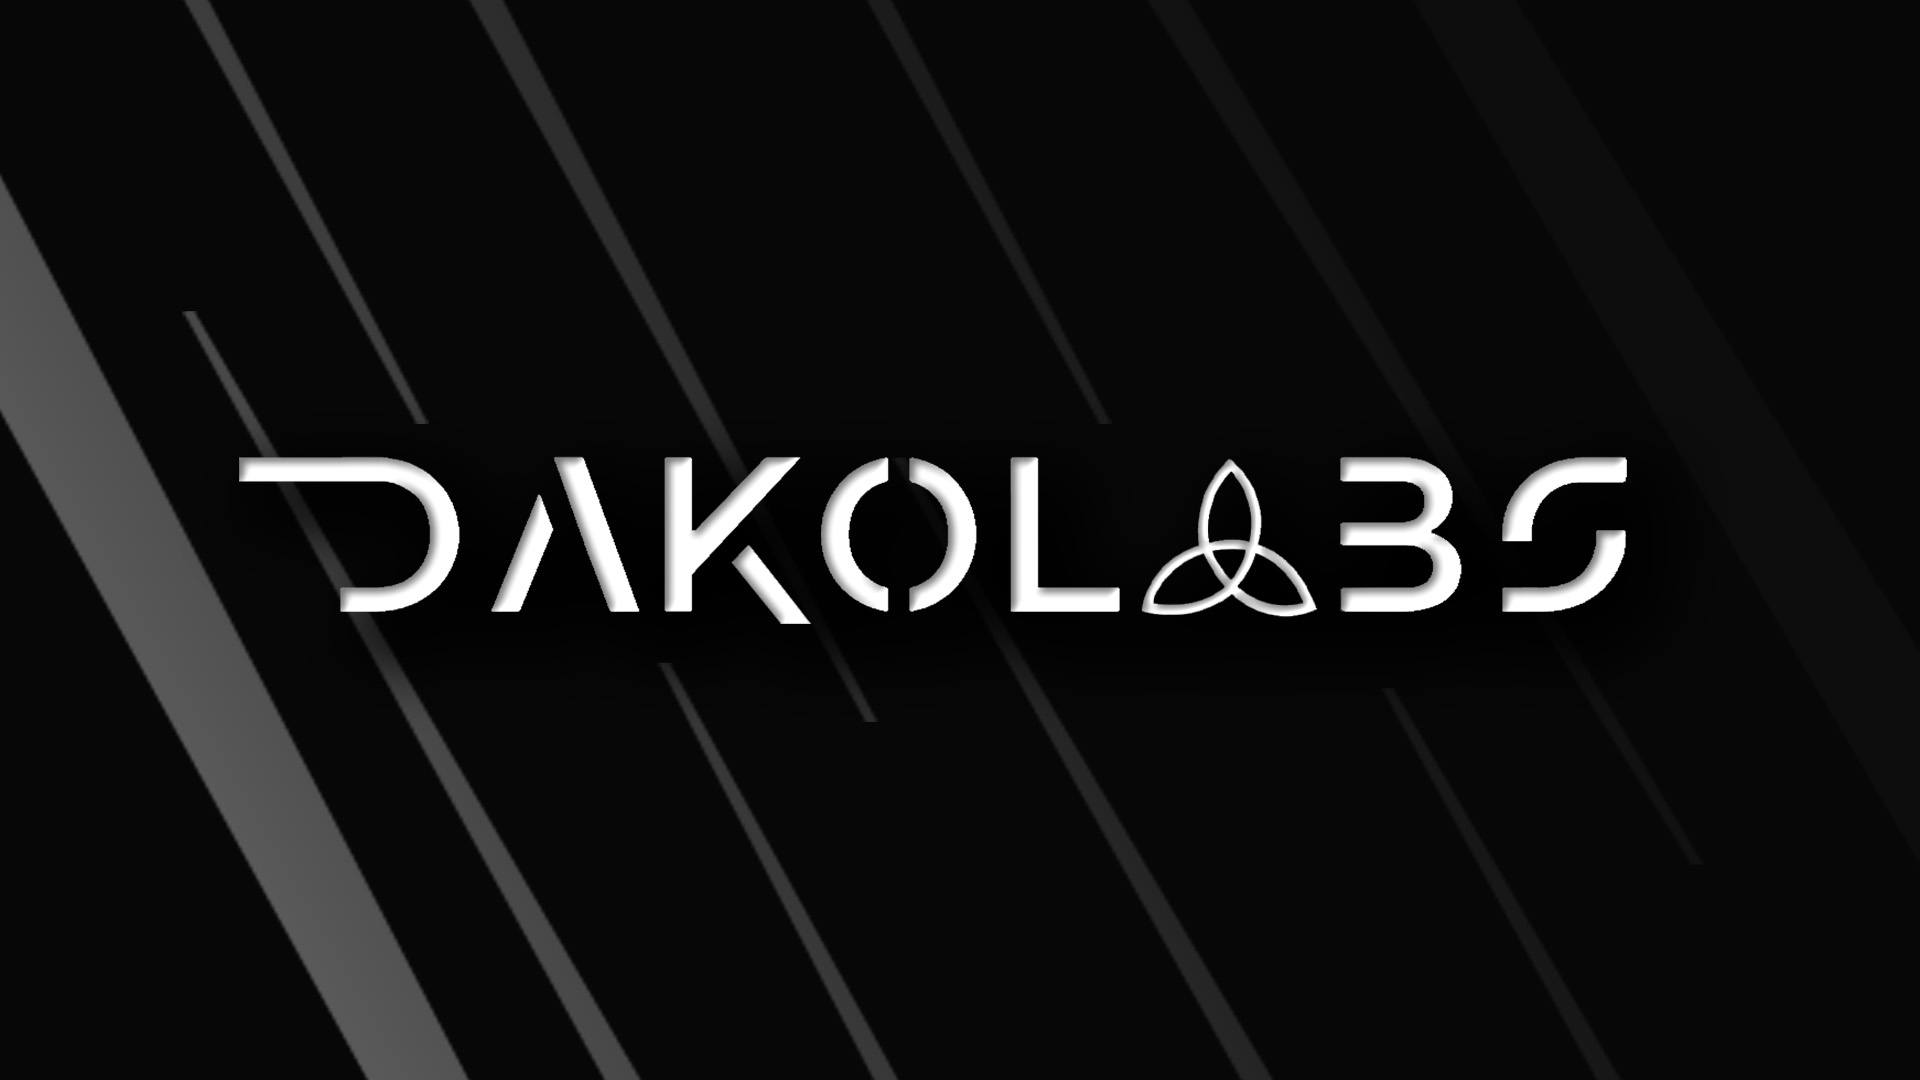 DakoLabs – Introducing the Initiative that Converges the Power of Blockchain, NFTs, and Real-World Utility